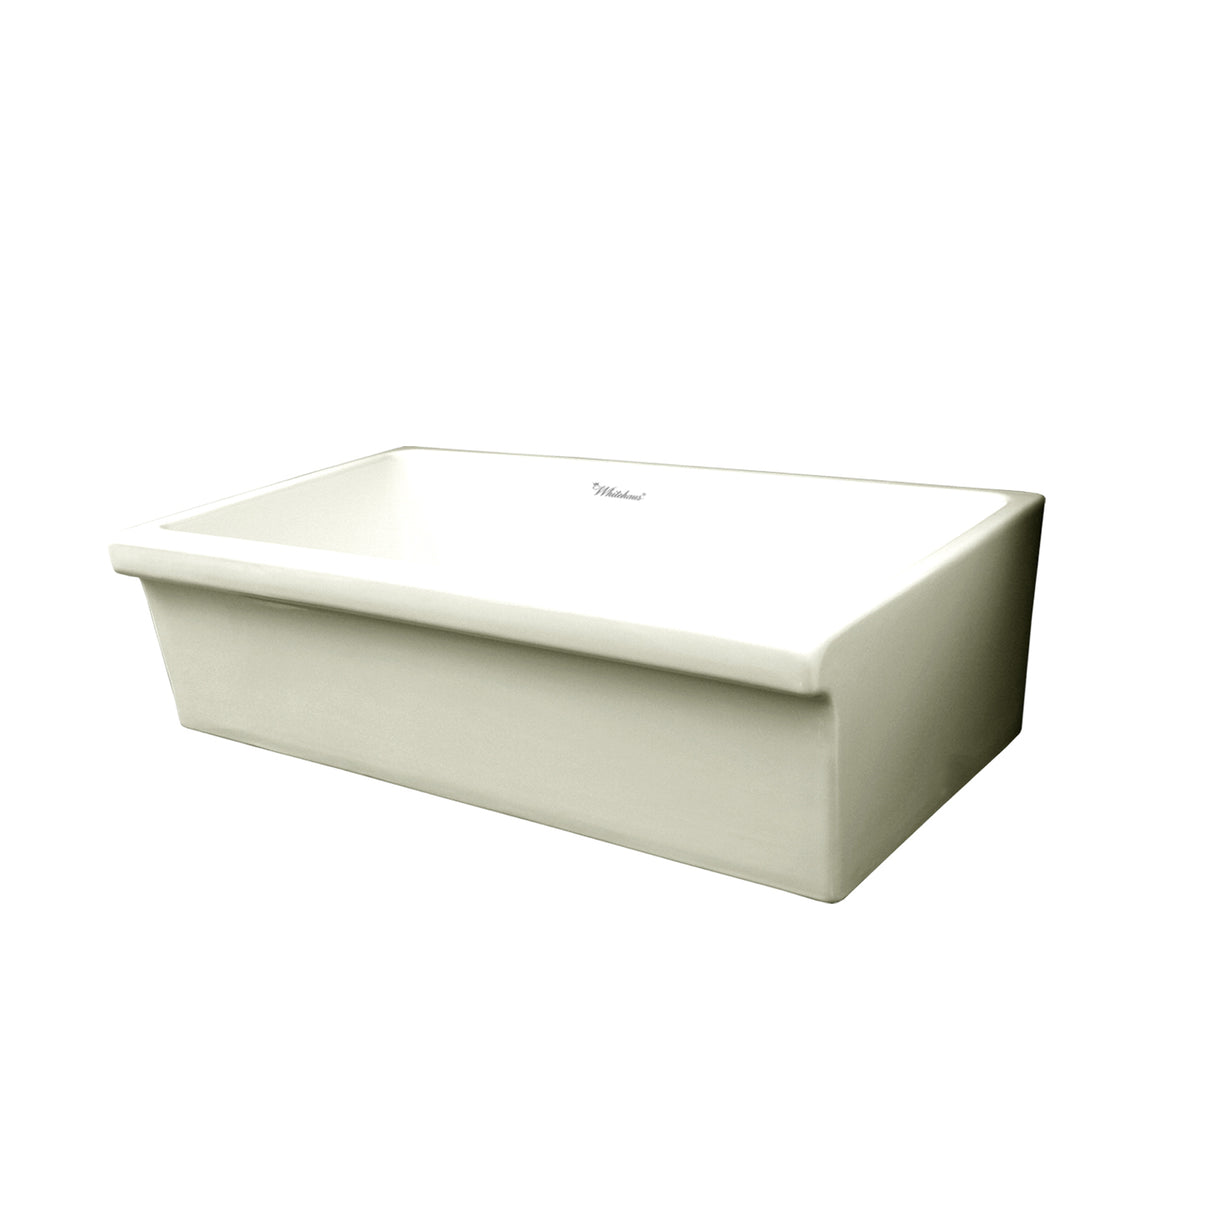 Farmhaus Fireclay Quatro Alcove Large Reversible Sink with Decorative 2 ½" Lip on One Side and 2" Lip on the Opposite Side